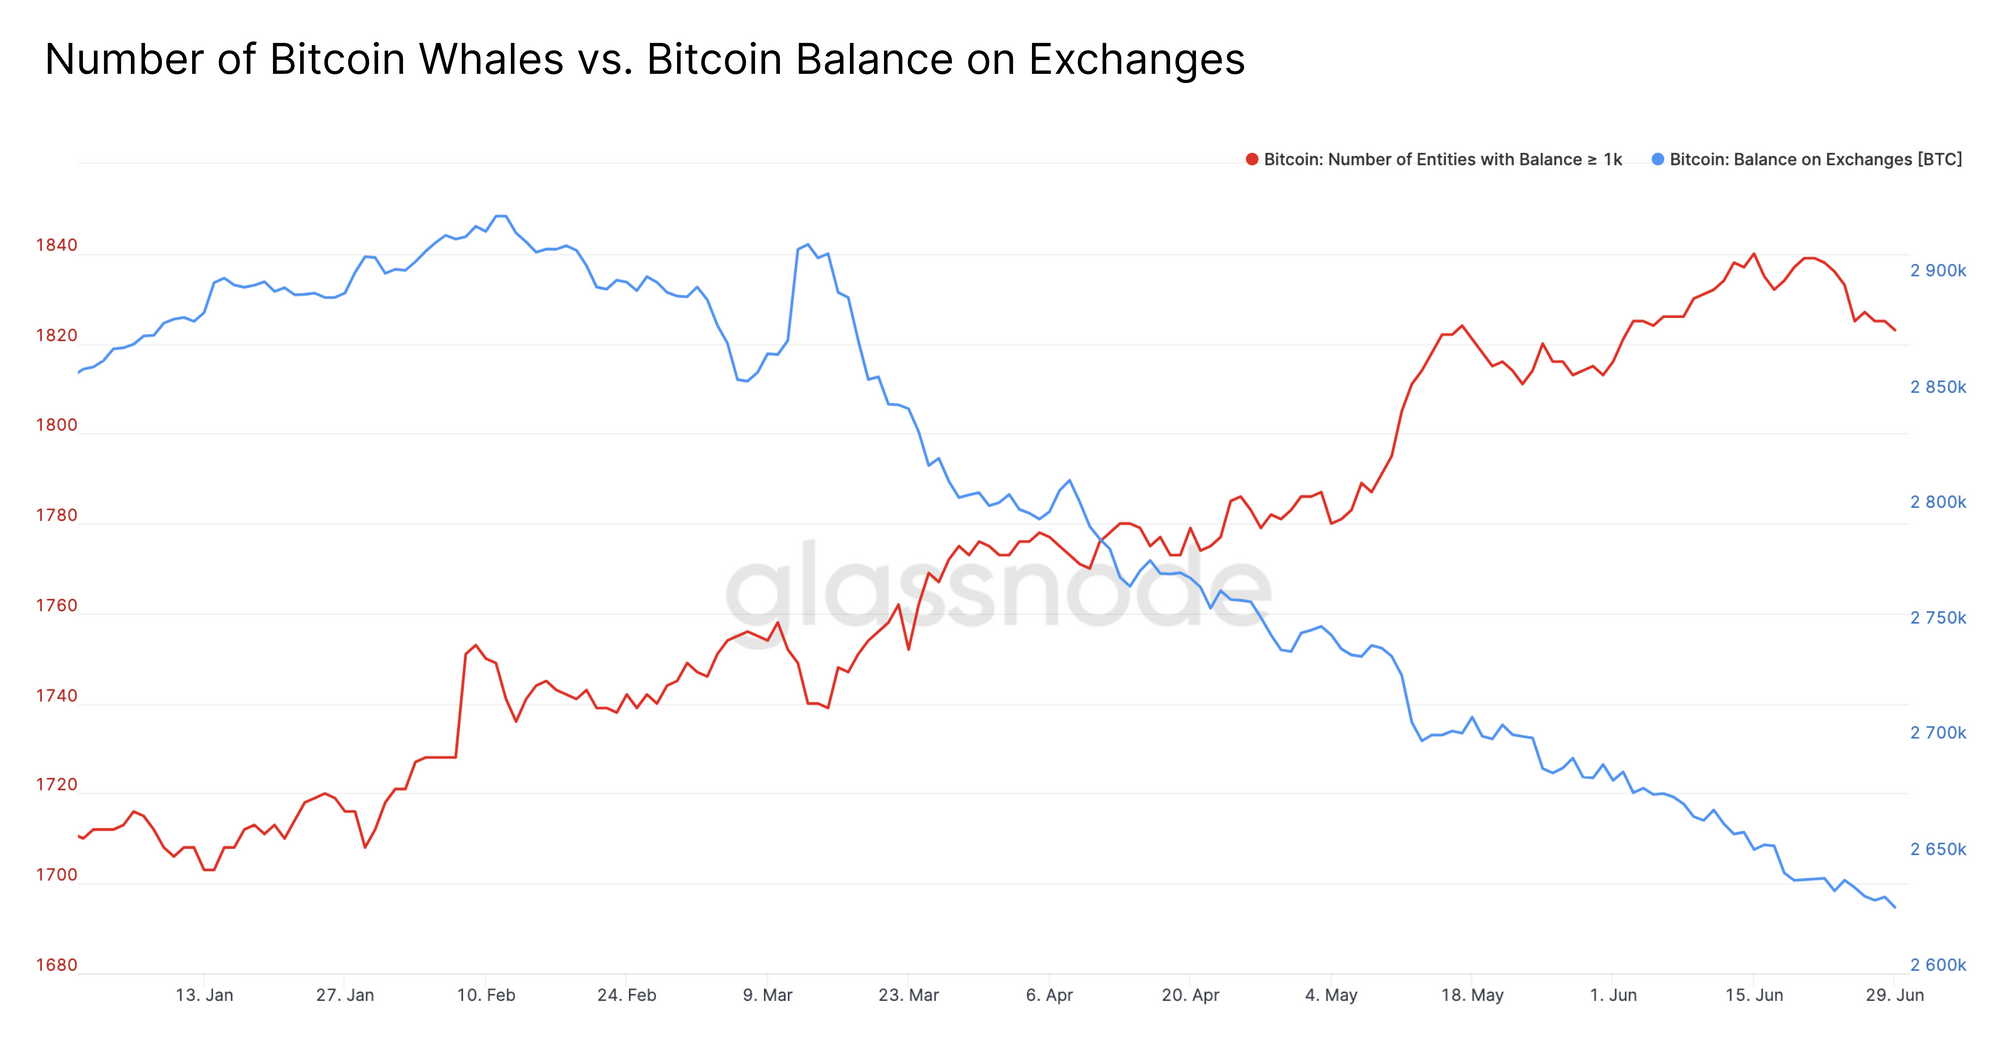 whale numbers vs balance on exchanges 1